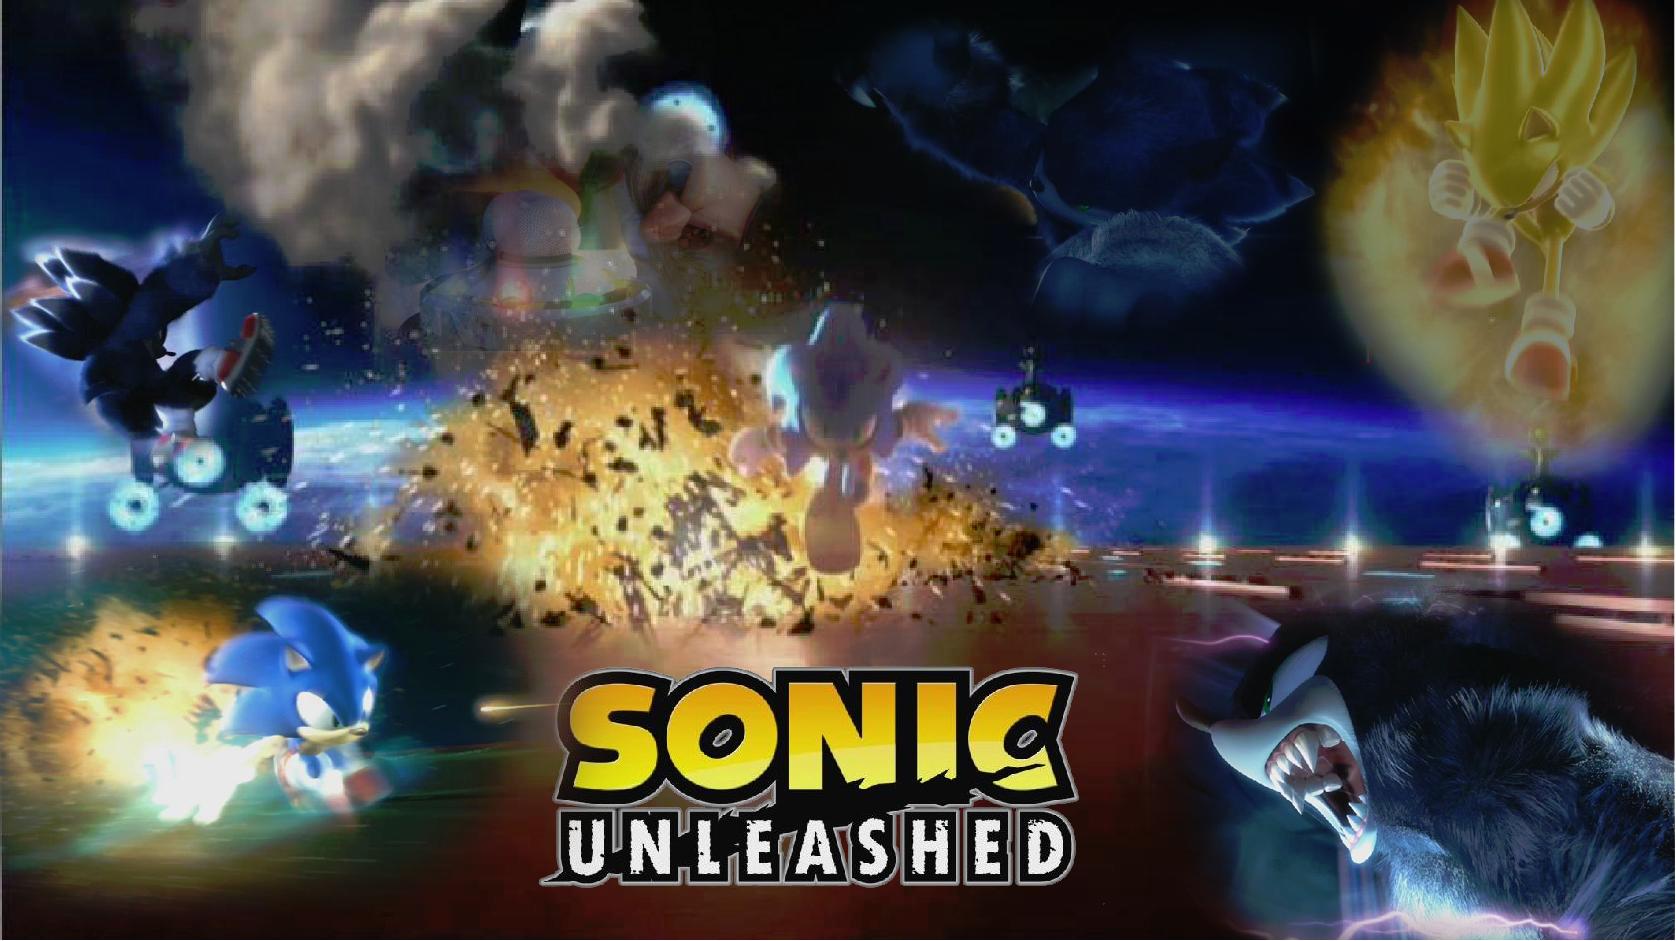 http://fc68.deviantart.com/fs32/f/2008/226/f/a/Sonic_Unleashed_Poster_by_MetalshadowN64.jpg